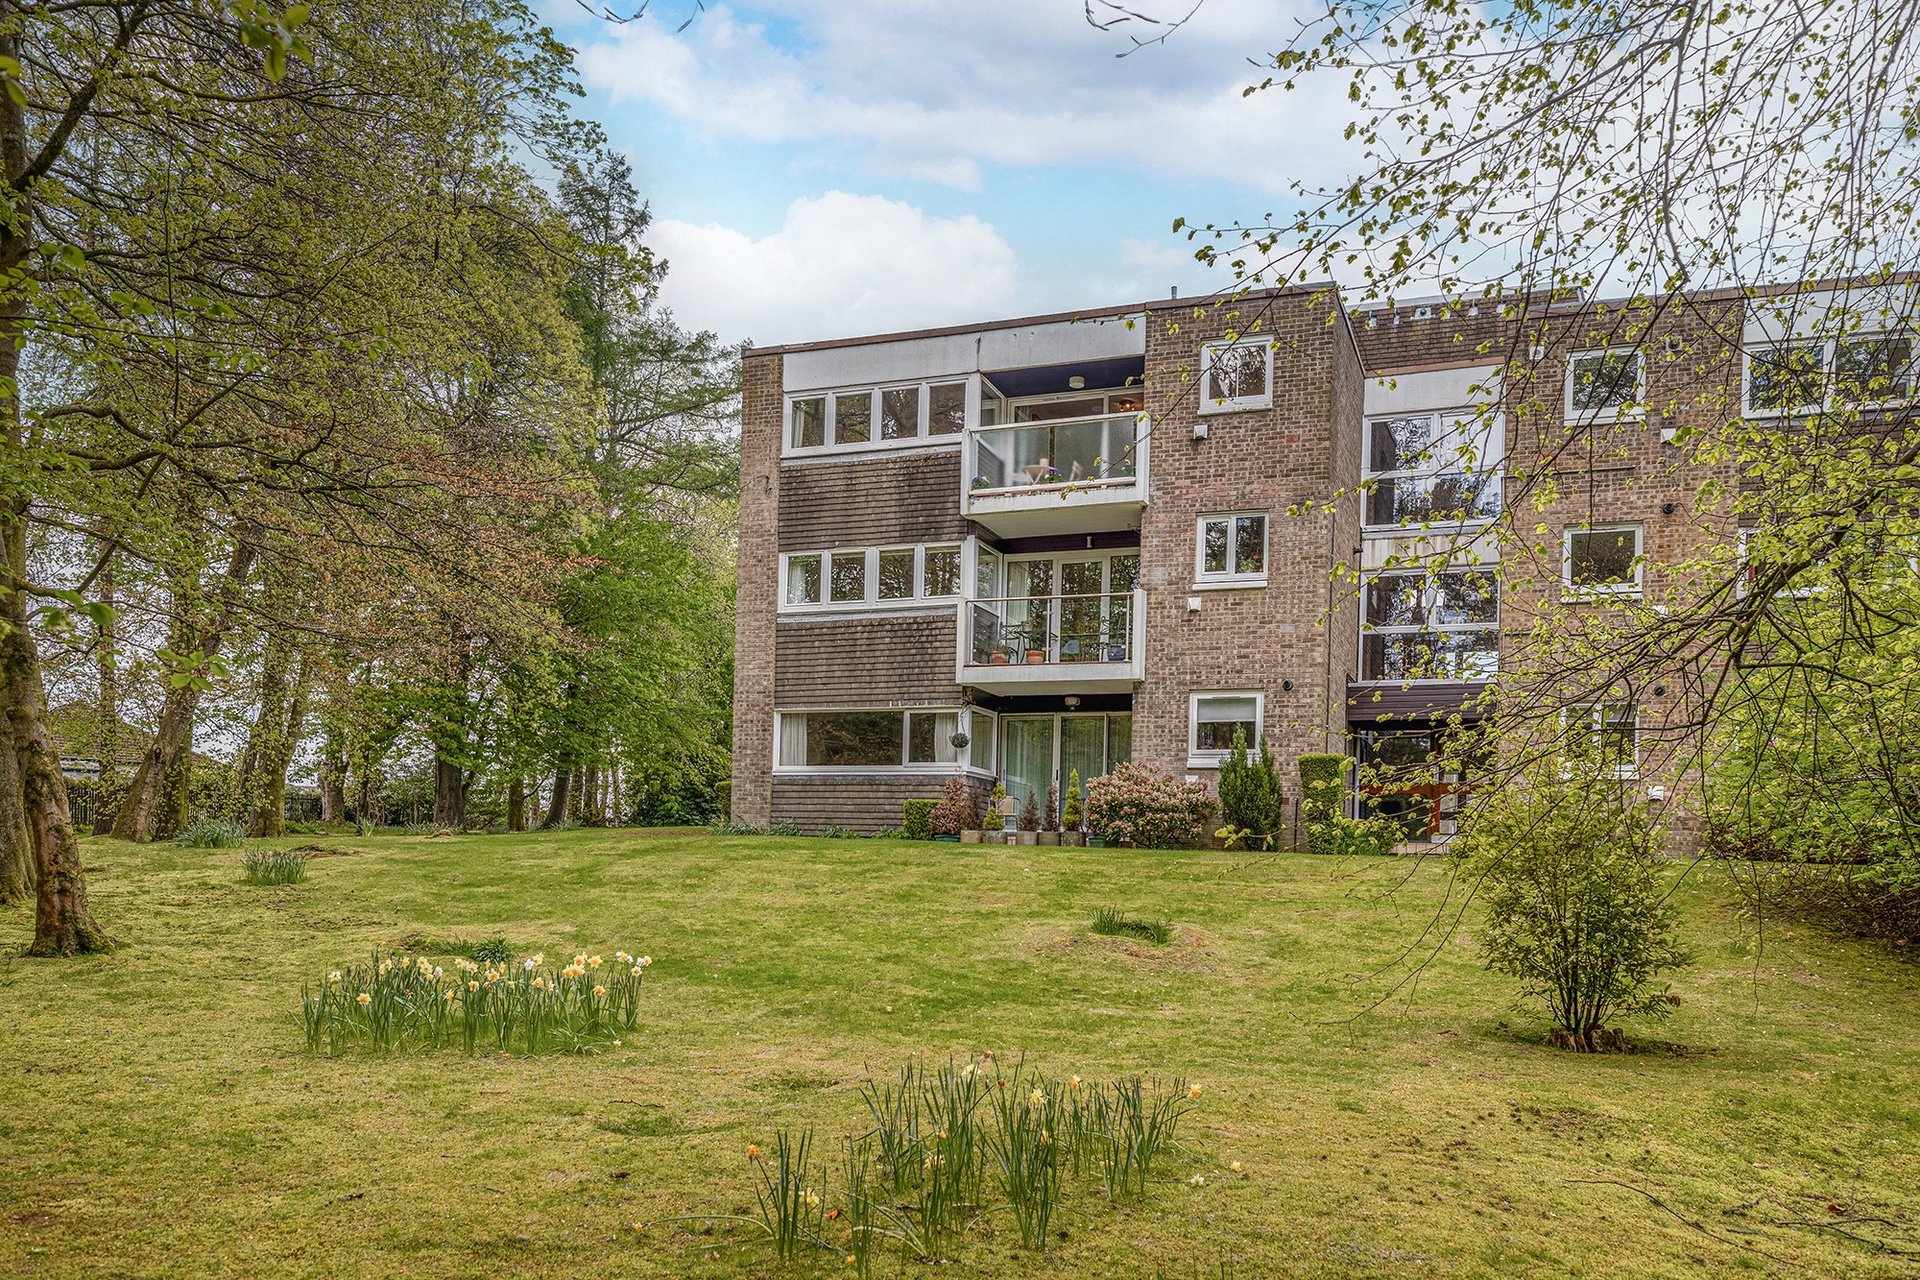 Flat 2/3, Whistlefield Court, 2 Canniesburn Road, Bearsden, G61 1PX - Picture #26